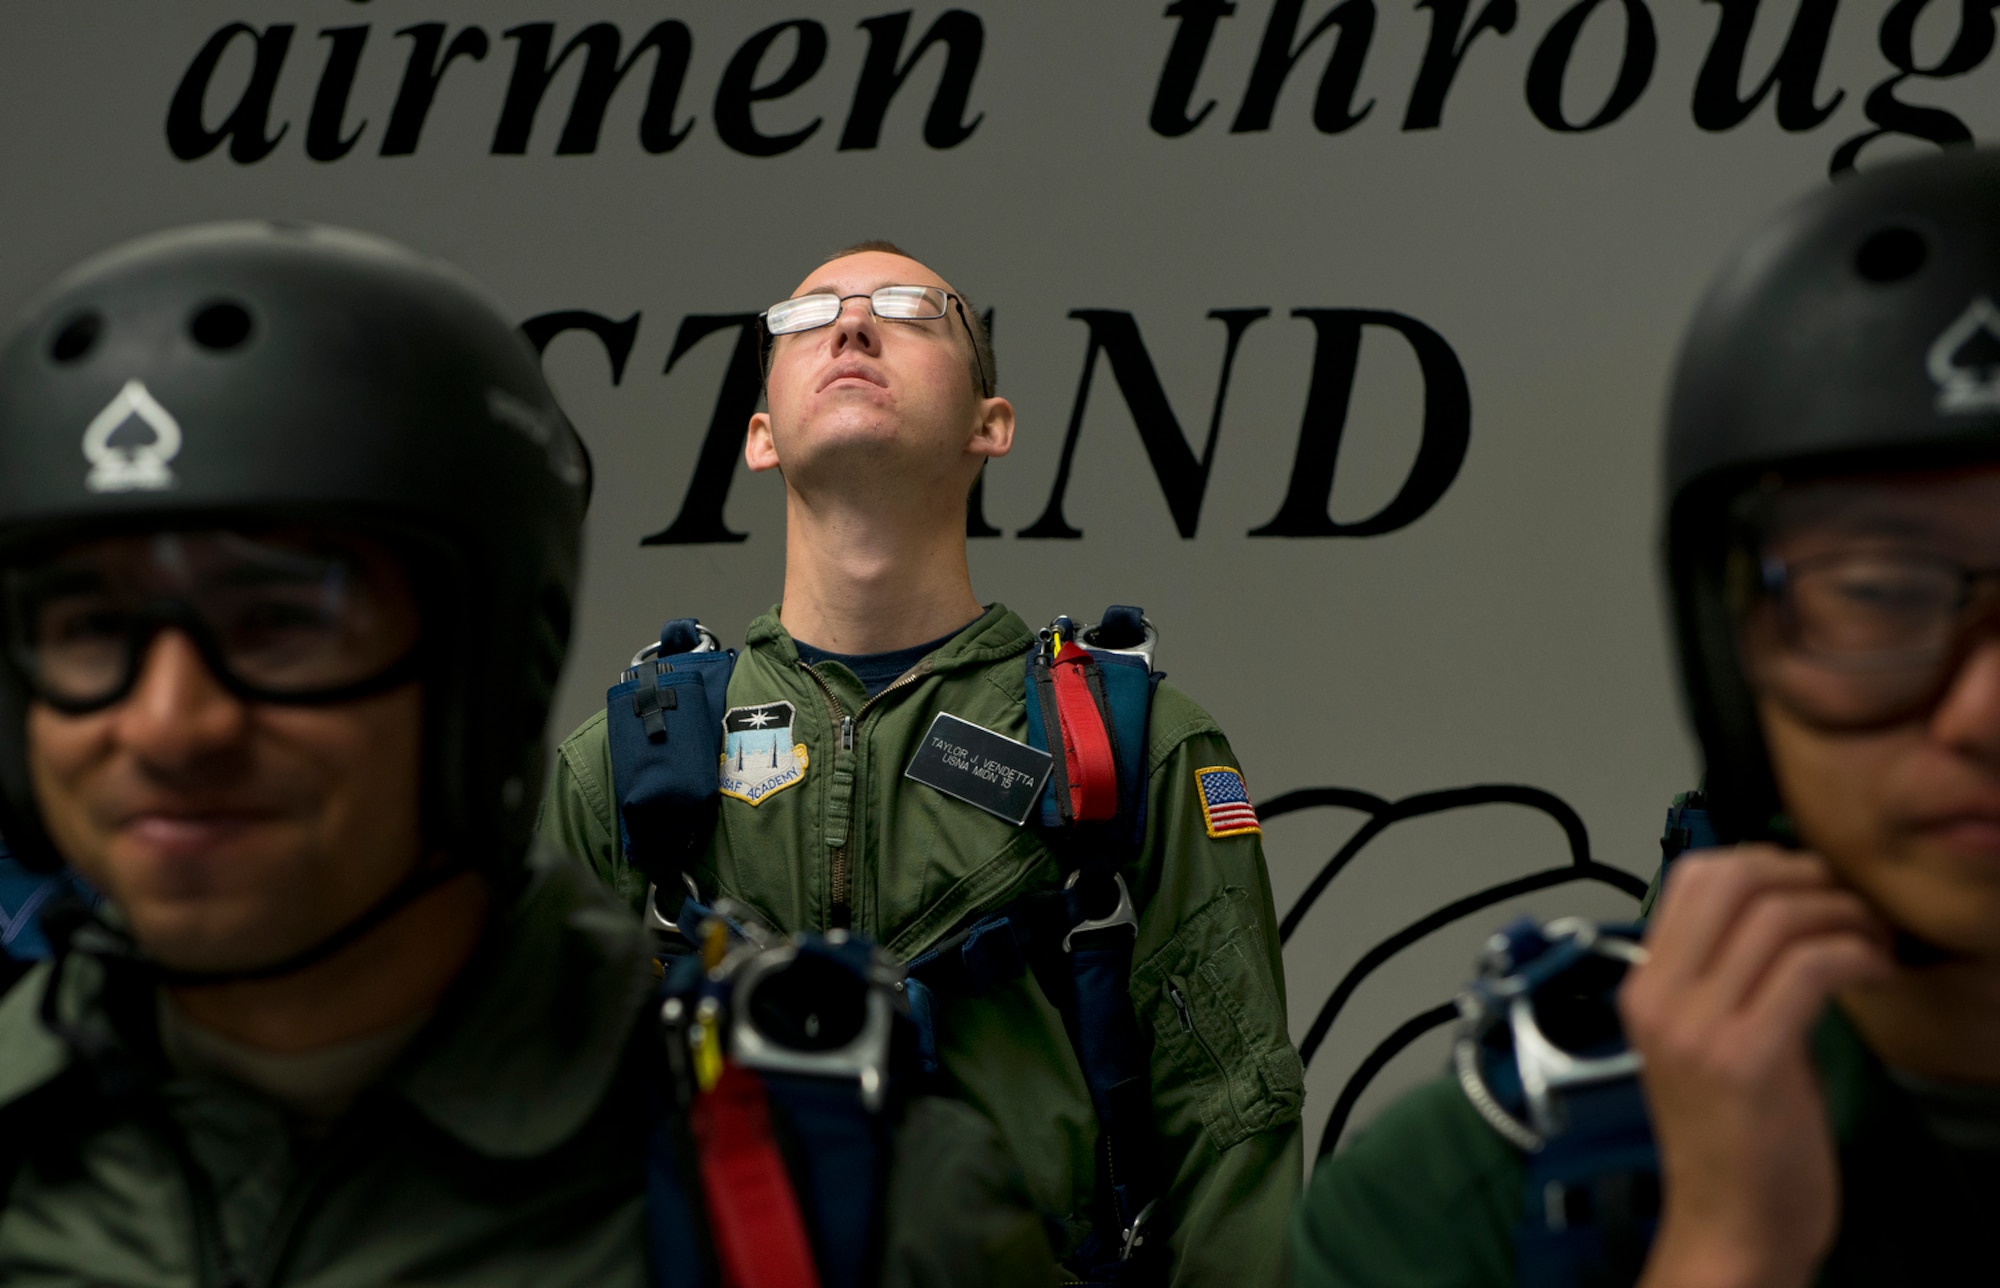 MidshipmanTaylor Vendetta, of the U.S. Navel Academy tries to relax before his first free-fall jump at the U.S. Air Force Academy's AM490 Basic Parachuting course. (U.S. Air Force photo/Tech. Sgt. Bennie J. Davis III)